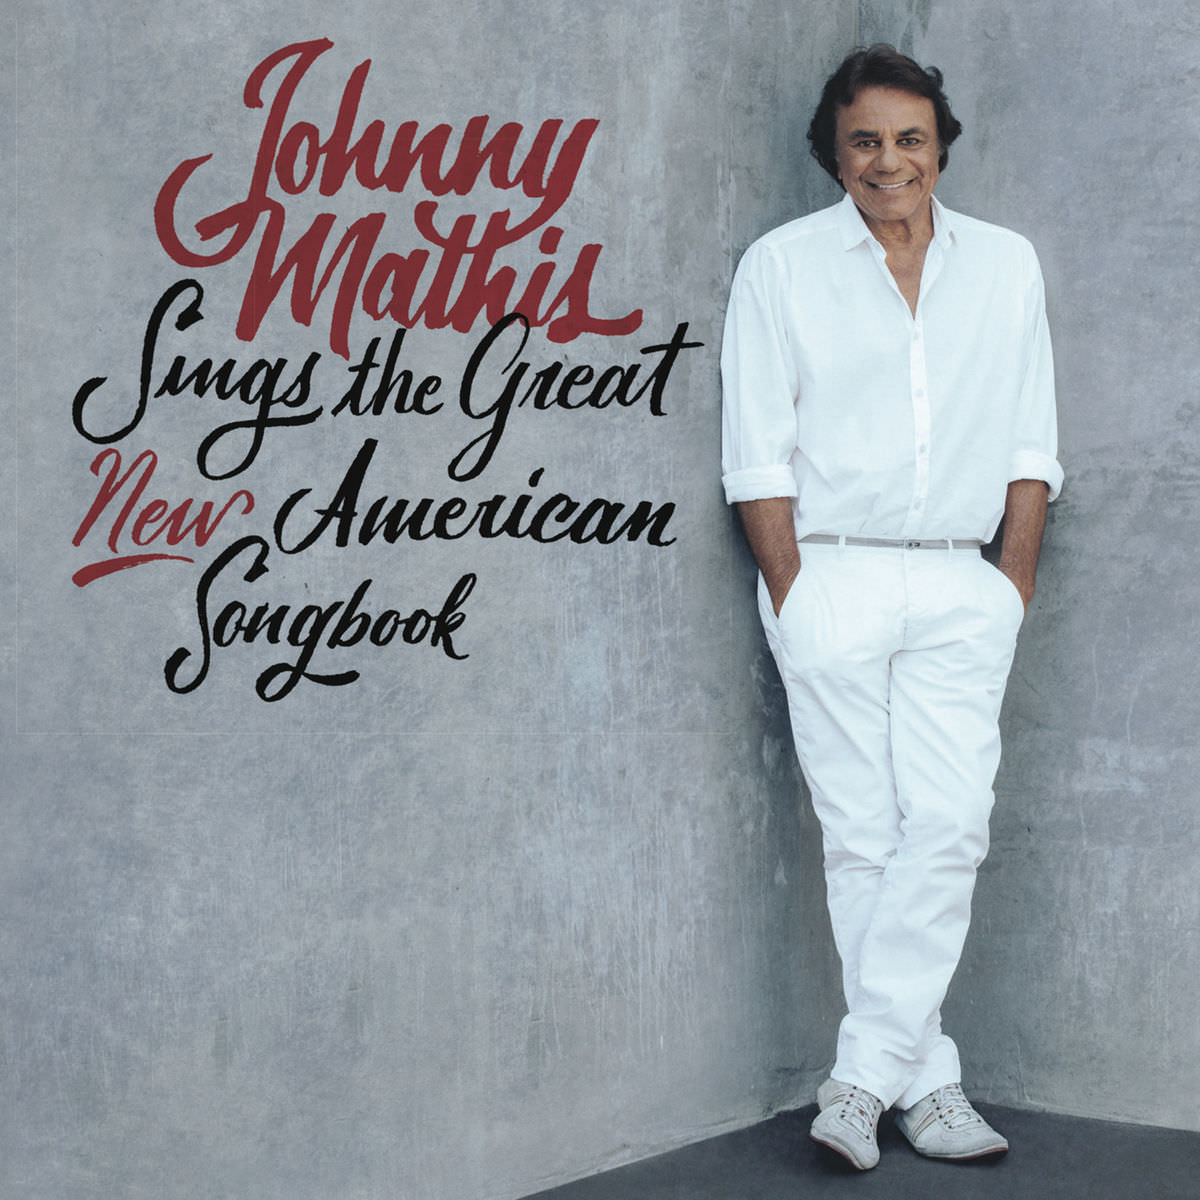 Johnny Mathis – Johnny Mathis Sings The Great New American Songbook (2017) [Qobuz FLAC 24bit/48kHz]